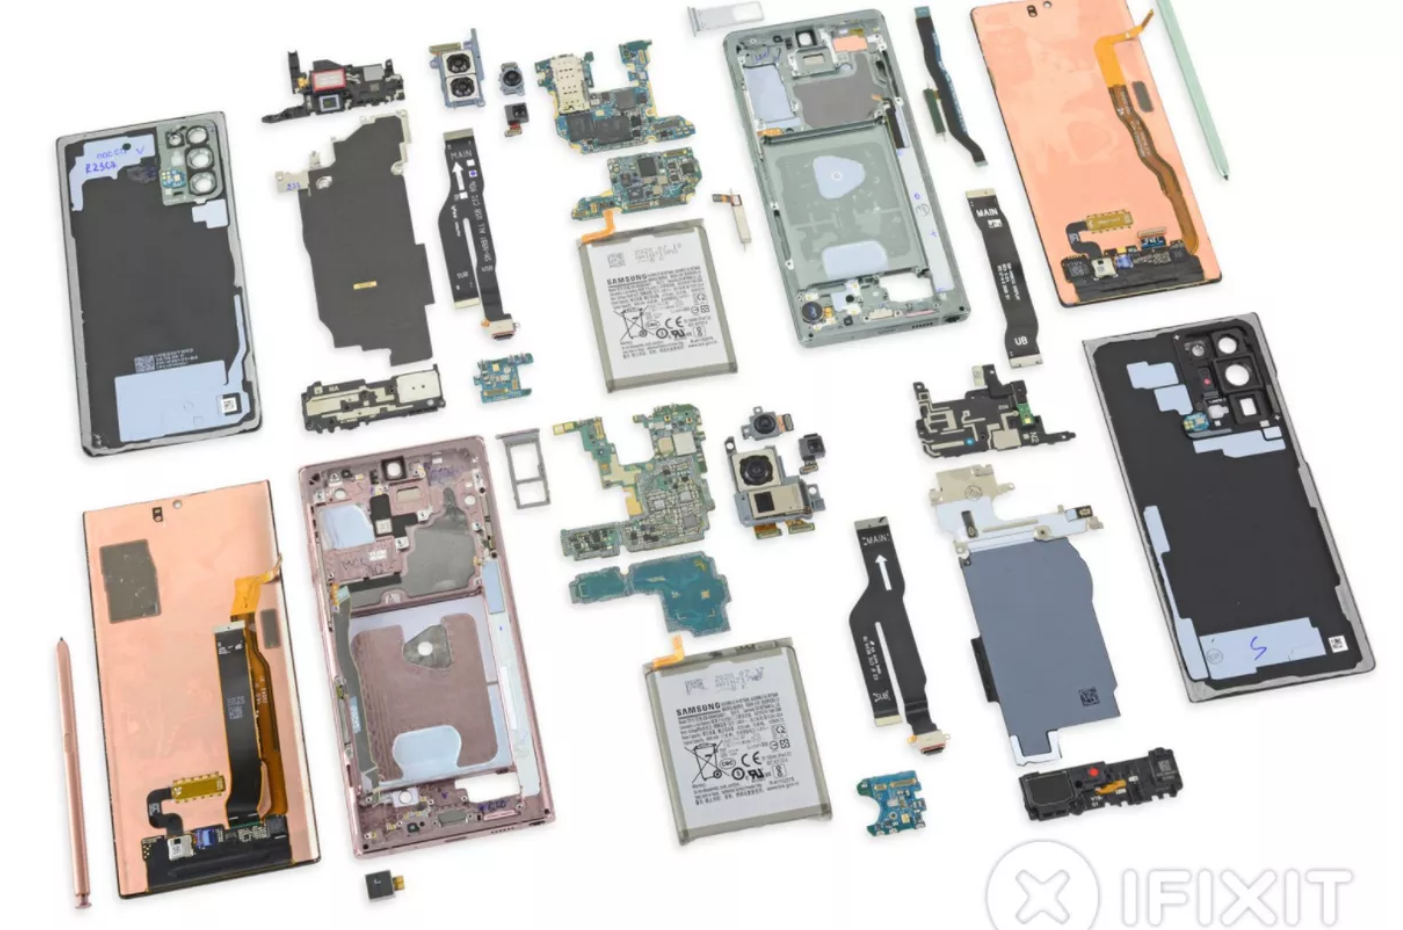 Samsung Galaxy Note 20 Ultra teardown from iFixit reveals why it runs hot